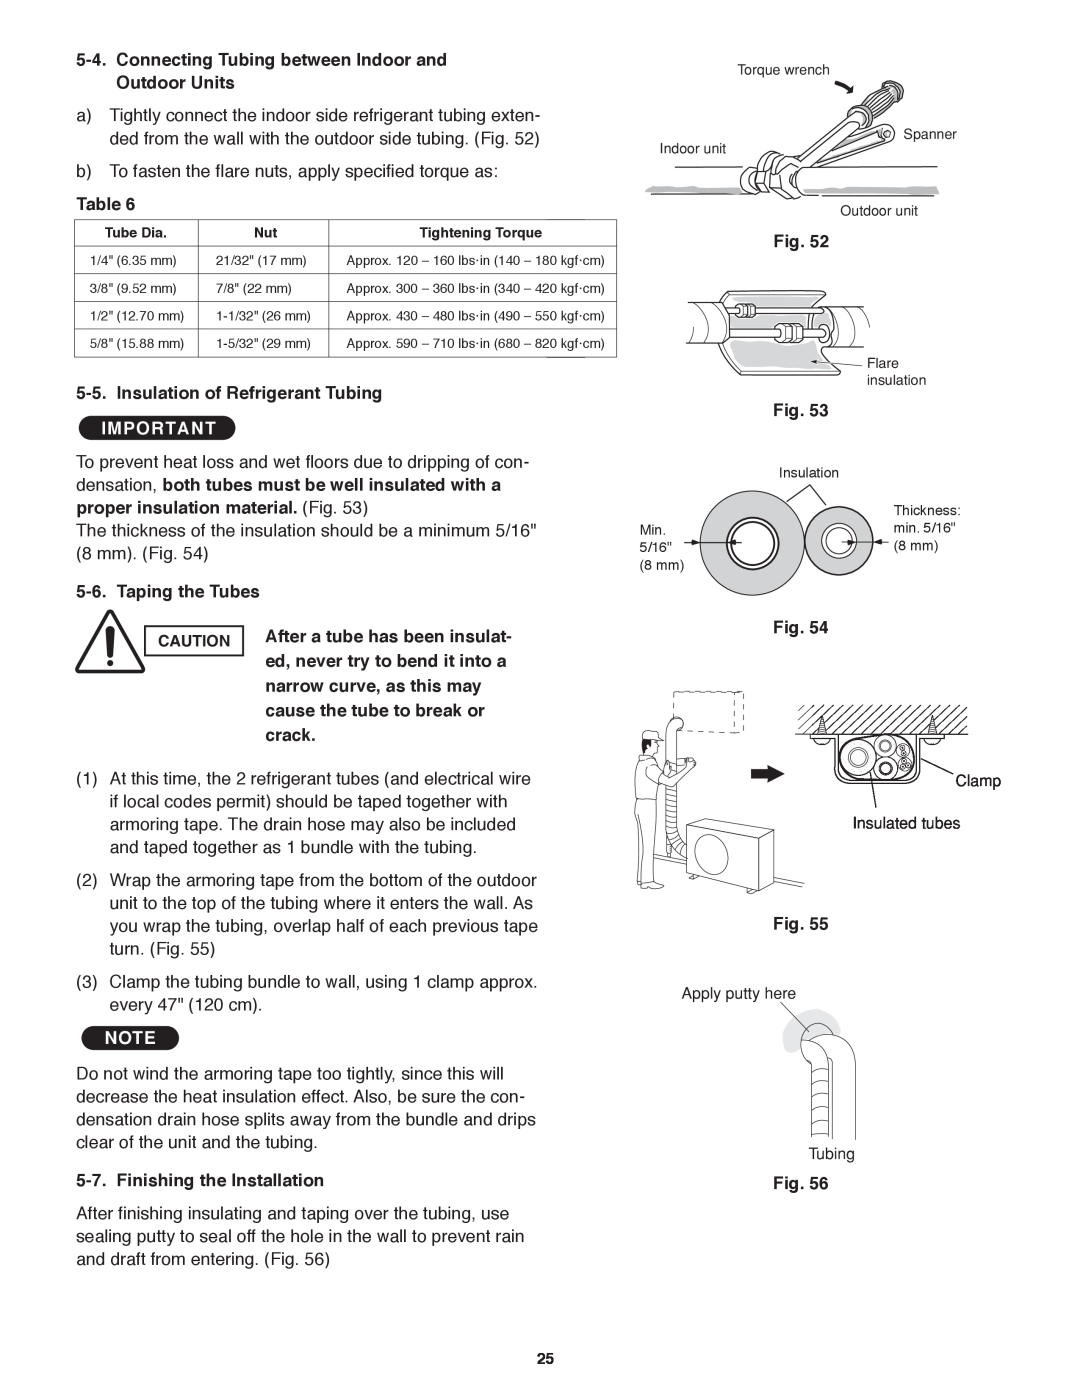 Panasonic CU-KE30NKU, CU-KE36NKU, CS-KE36NKU, CS-KE30NKU service manual Table 